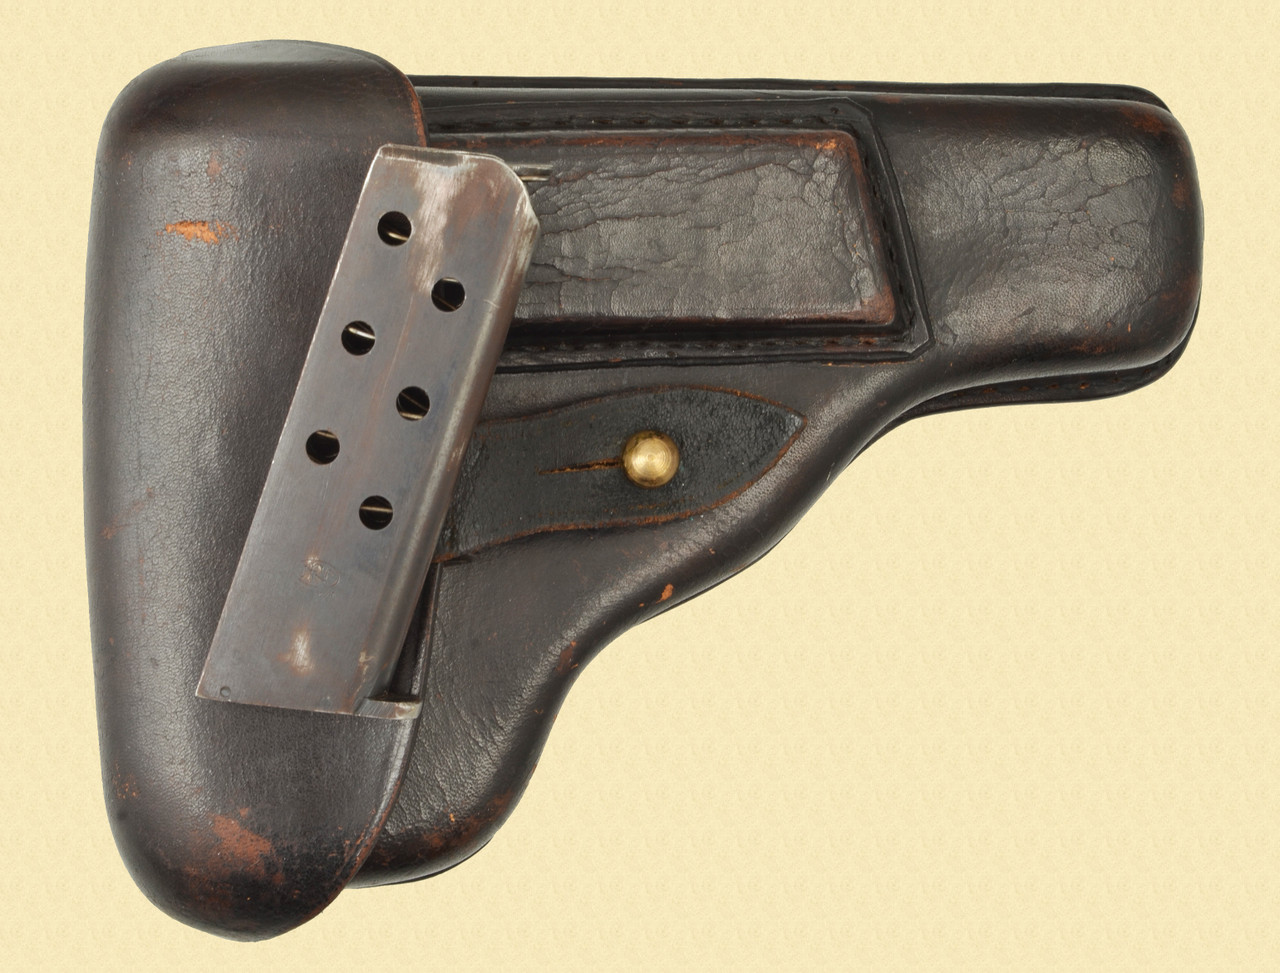 FINNISH FN BROWNING HOLSTER - C60483